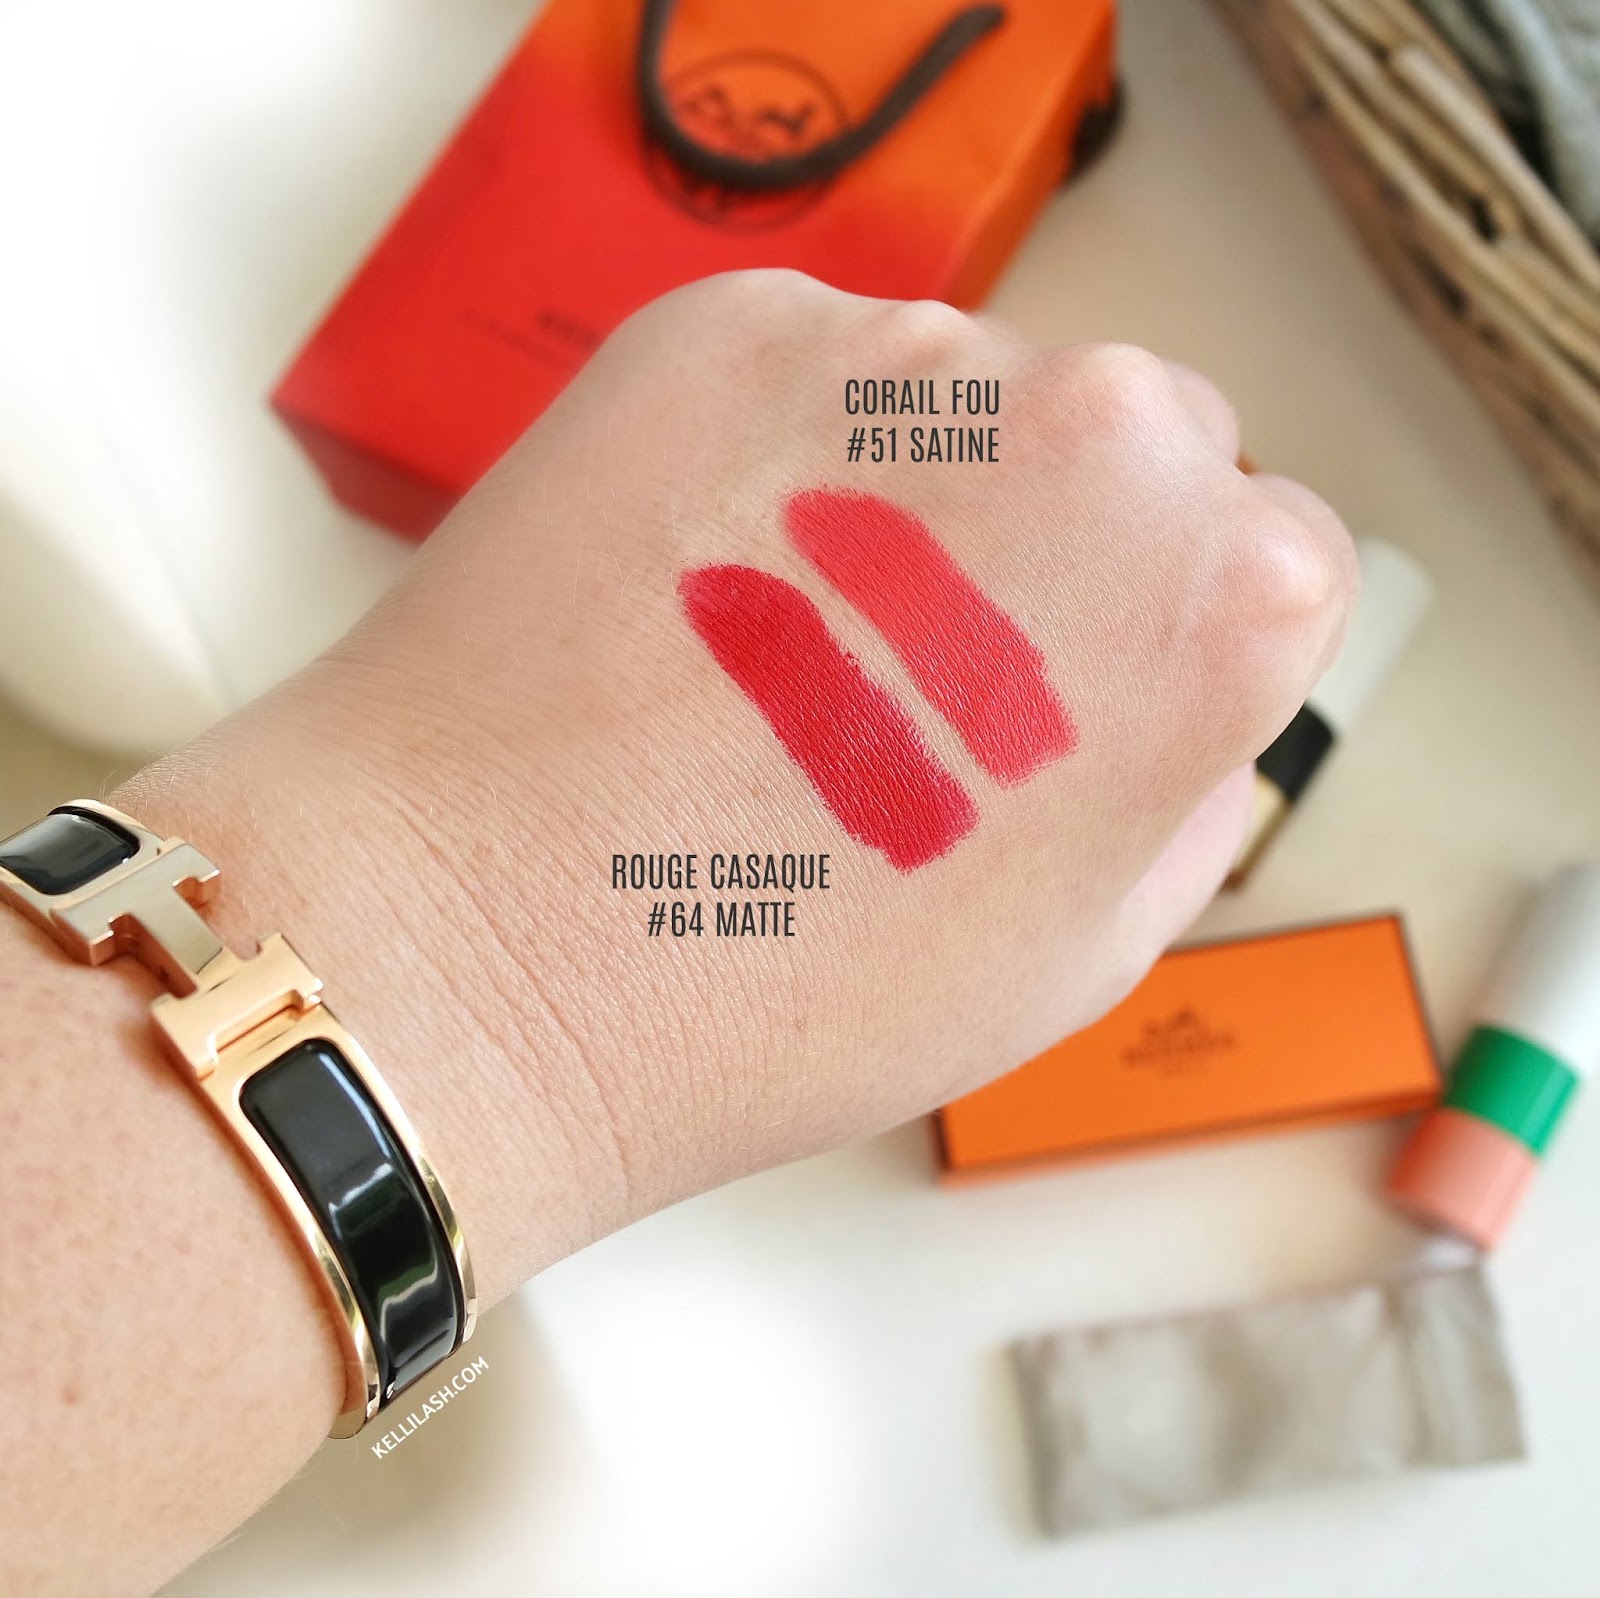 Hermes Lipsticks! The Best Gift?  Rouge Hermes Review, Swatches, Demo 